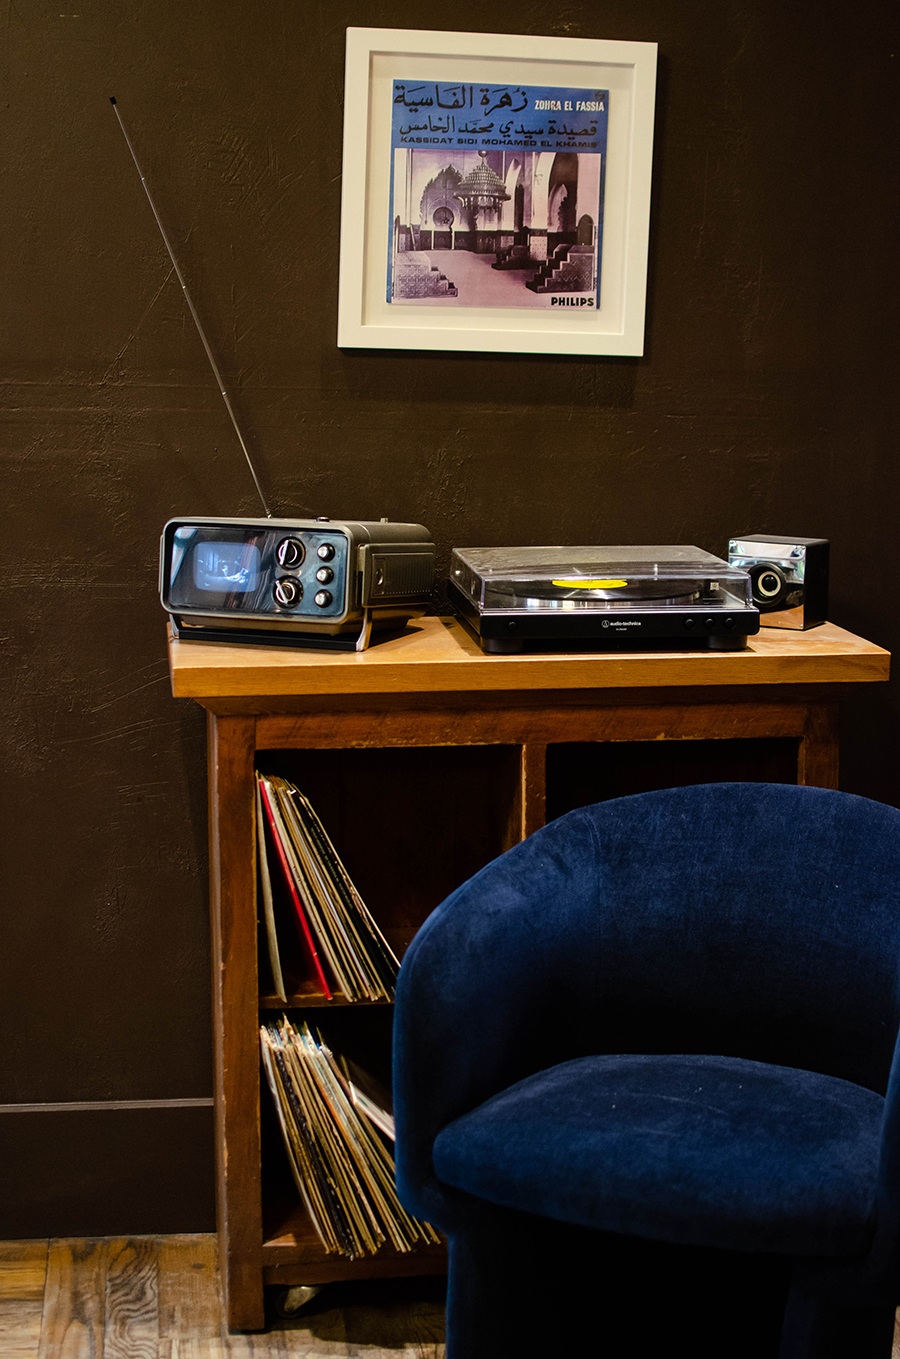 A blue velvet chair sits in front of a bookshelf with records, a record player, and a tiny old television.